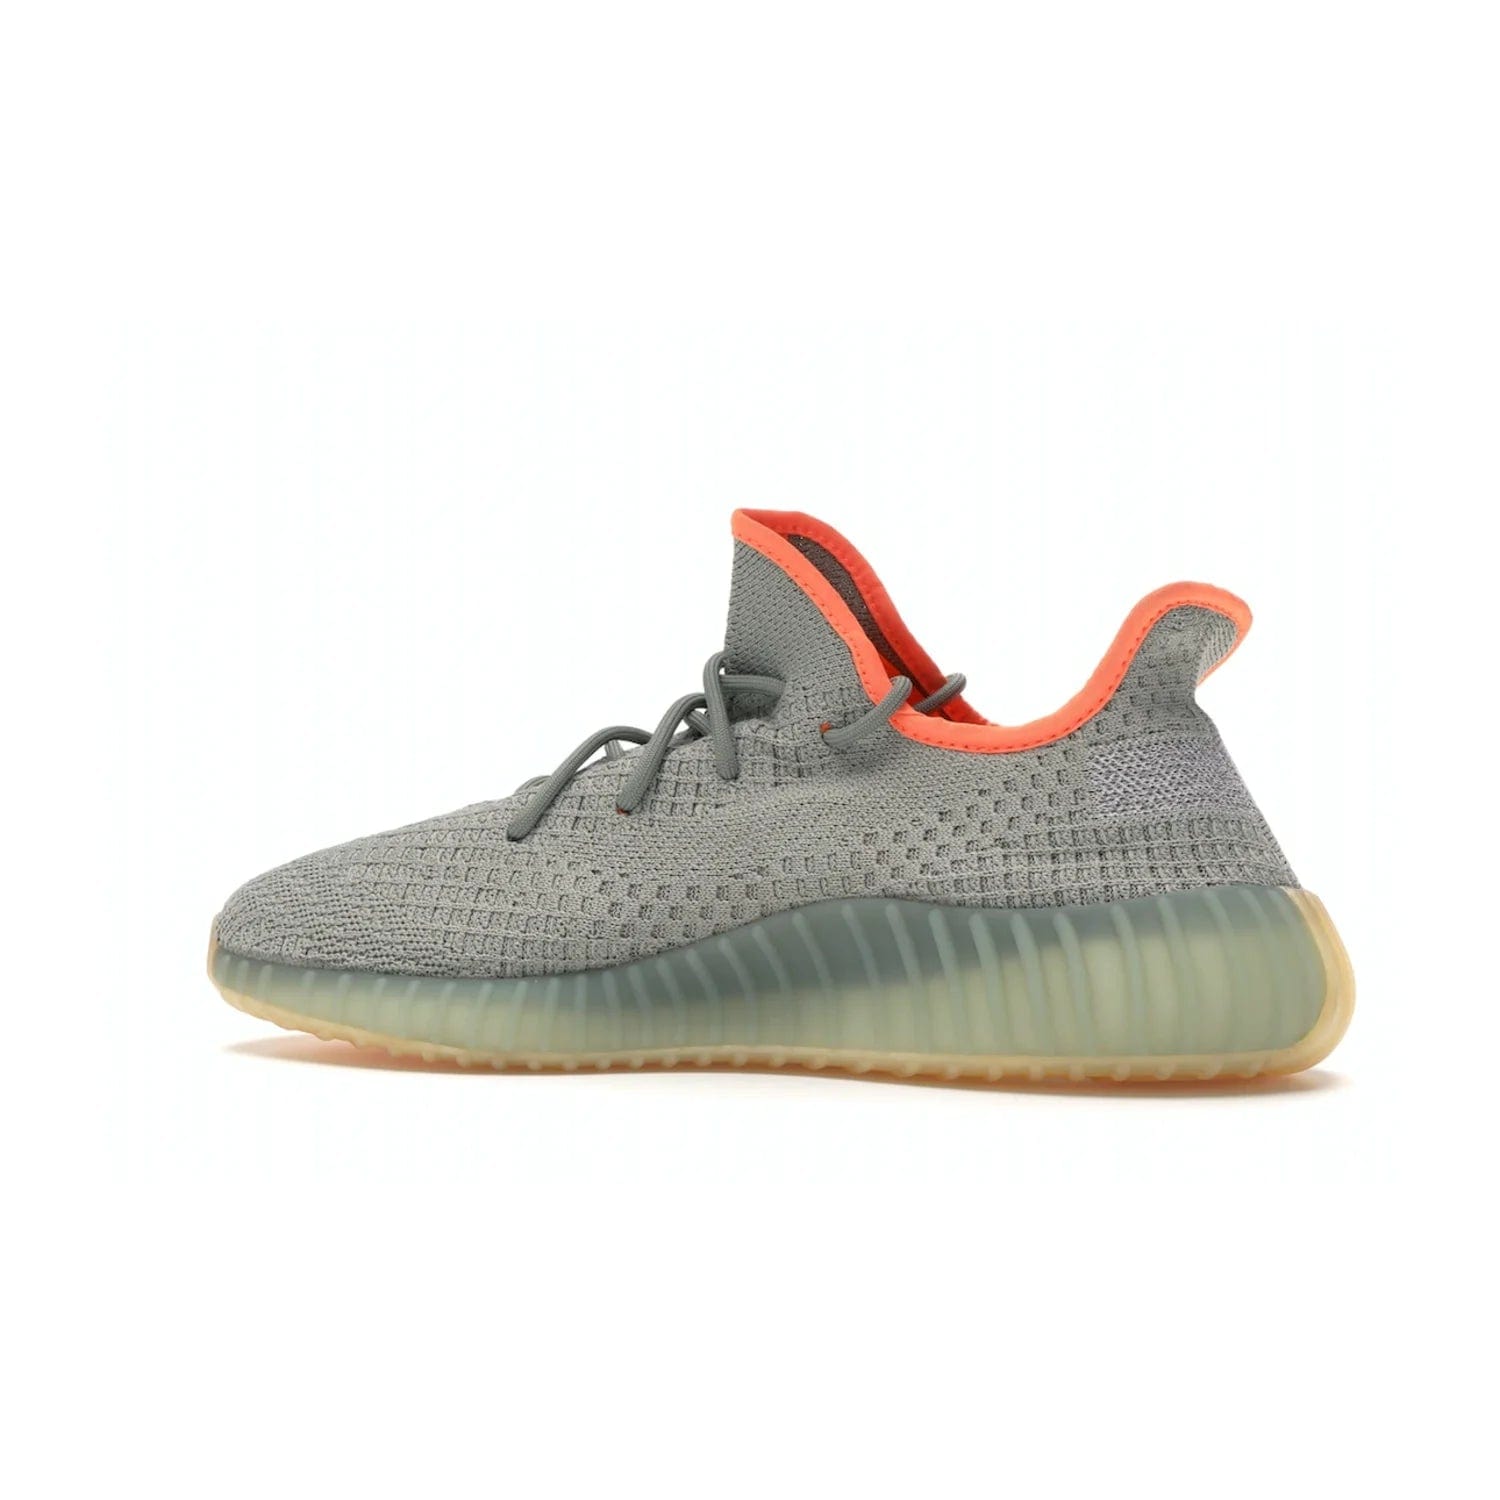 adidas Yeezy Boost 350 V2 Desert Sage - Image 21 - Only at www.BallersClubKickz.com - Upgrade your style with the adidas Yeezy Boost 350 V2 Desert Sage. This 350V2 features a Desert Sage primeknit upper with tonal side stripe, and an orange-highlighted translucent Boost cushioning sole. Stay on-trend in effortless style.